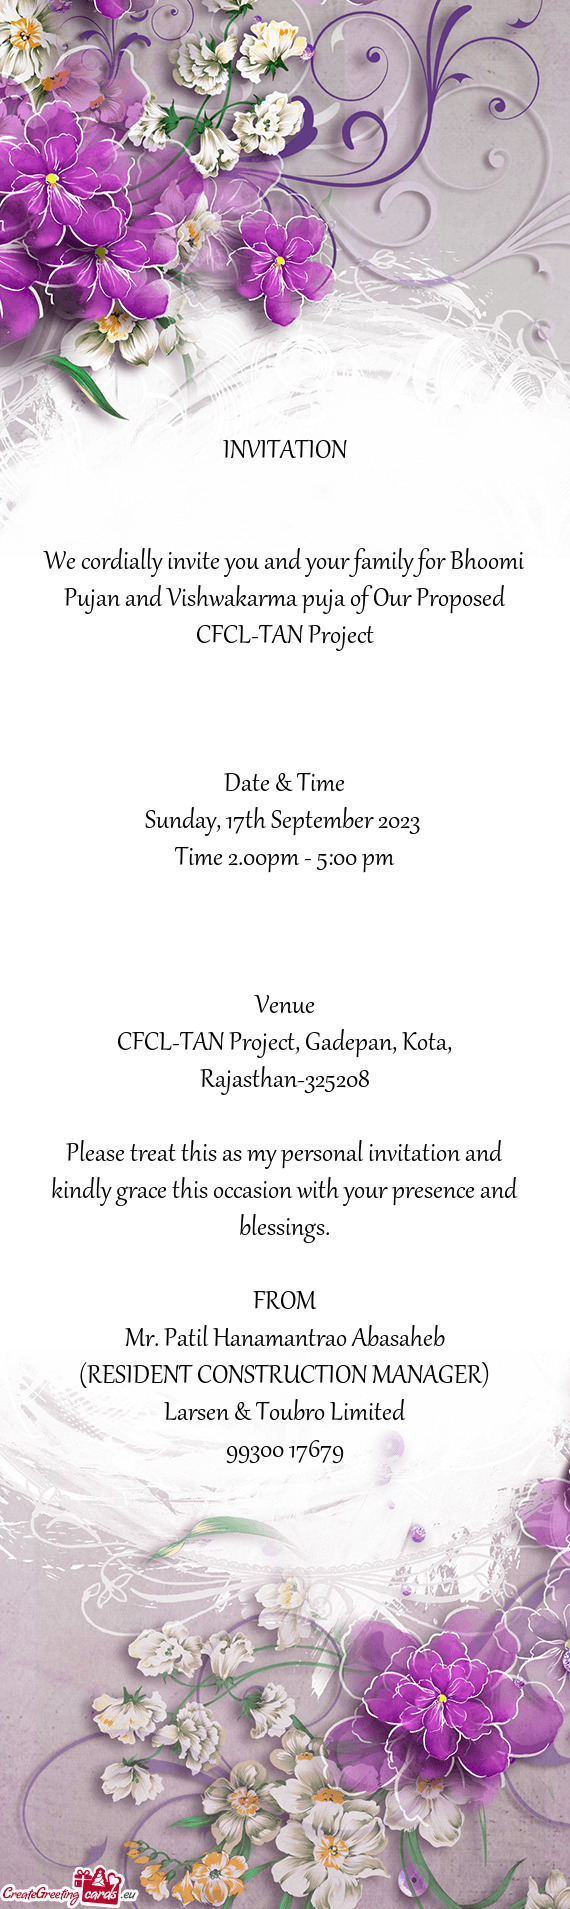 We cordially invite you and your family for Bhoomi Pujan and Vishwakarma puja of Our Proposed CFCL-T